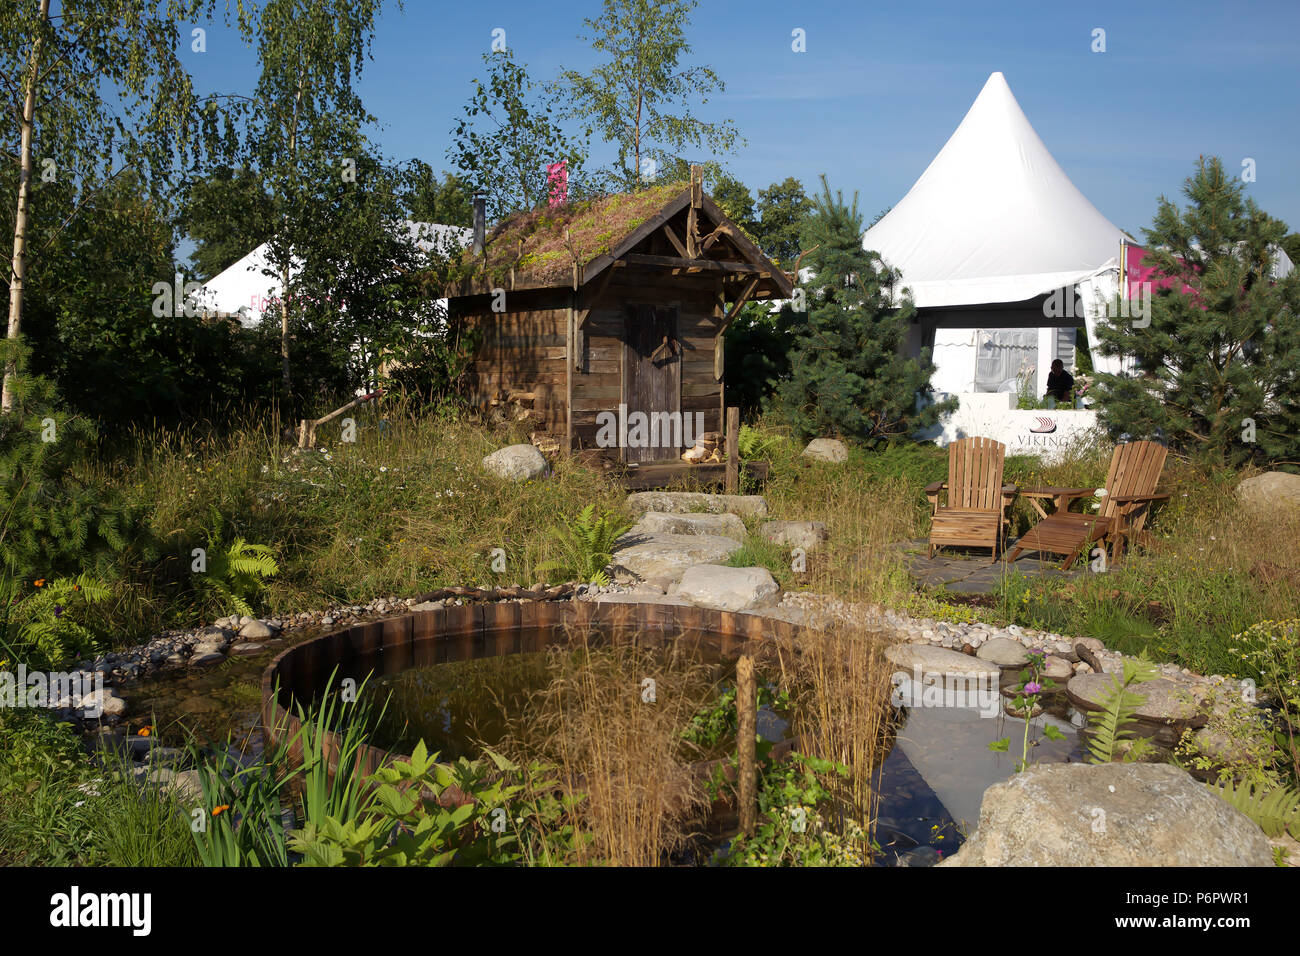 East Molesey, UK. 2nd July, 2018. The Viking Cruises Nordic Lifestyle Garden. Press Day takes place at the RHS Hampton Court Palace Flower Show which runs from the 2nd-8th July 2018. It is the largest flower show in the world covering over 34 acres with the centre piece being the long walk. There are various gardens to admire and gain ideas from along with plant, flower stalls and various other garden features. Credit: Keith Larby/Alamy Live News Stock Photo